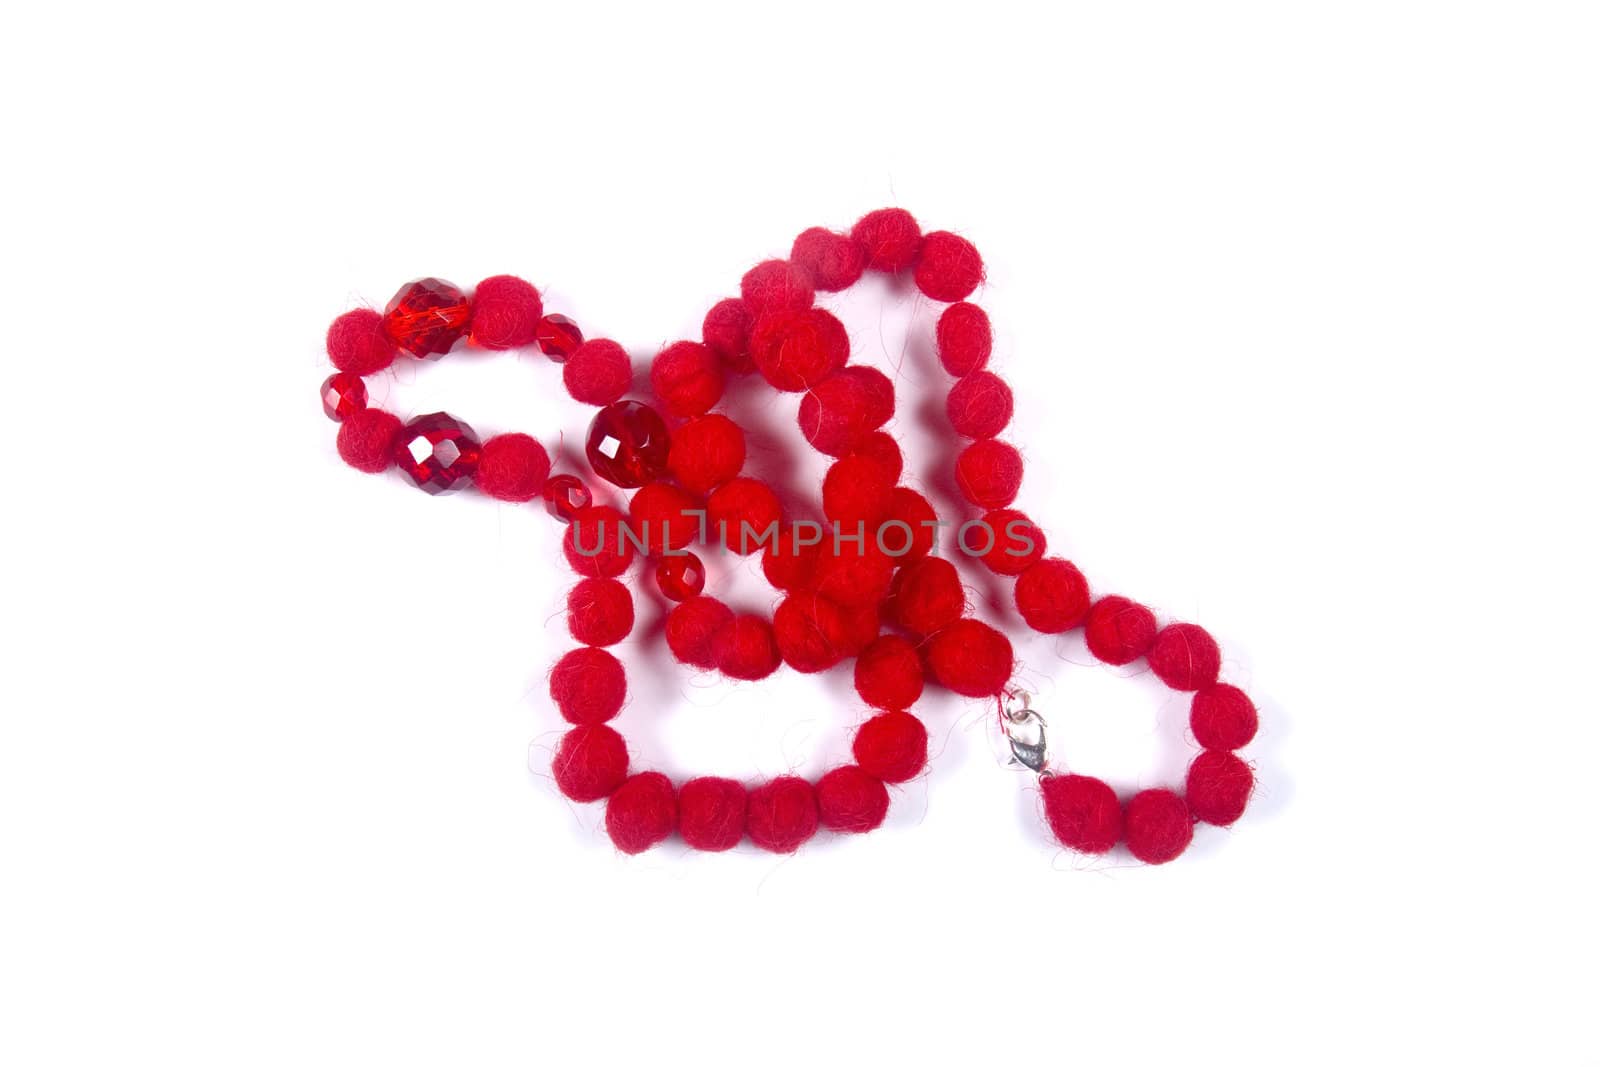 Red beads on white background